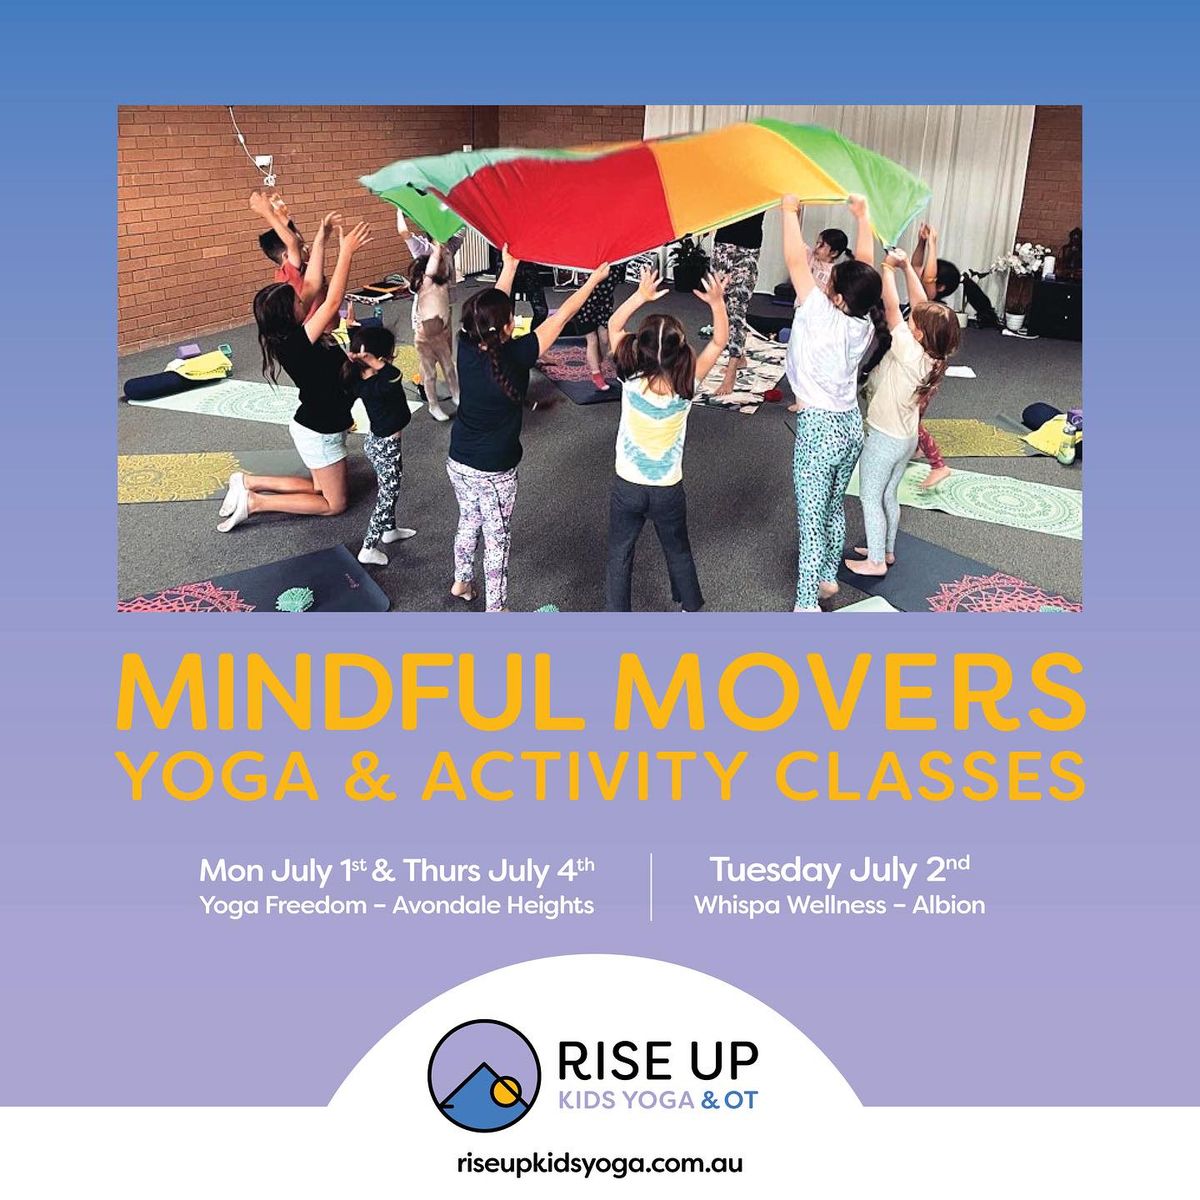 School Holiday Mindful Movers Classes for Kids